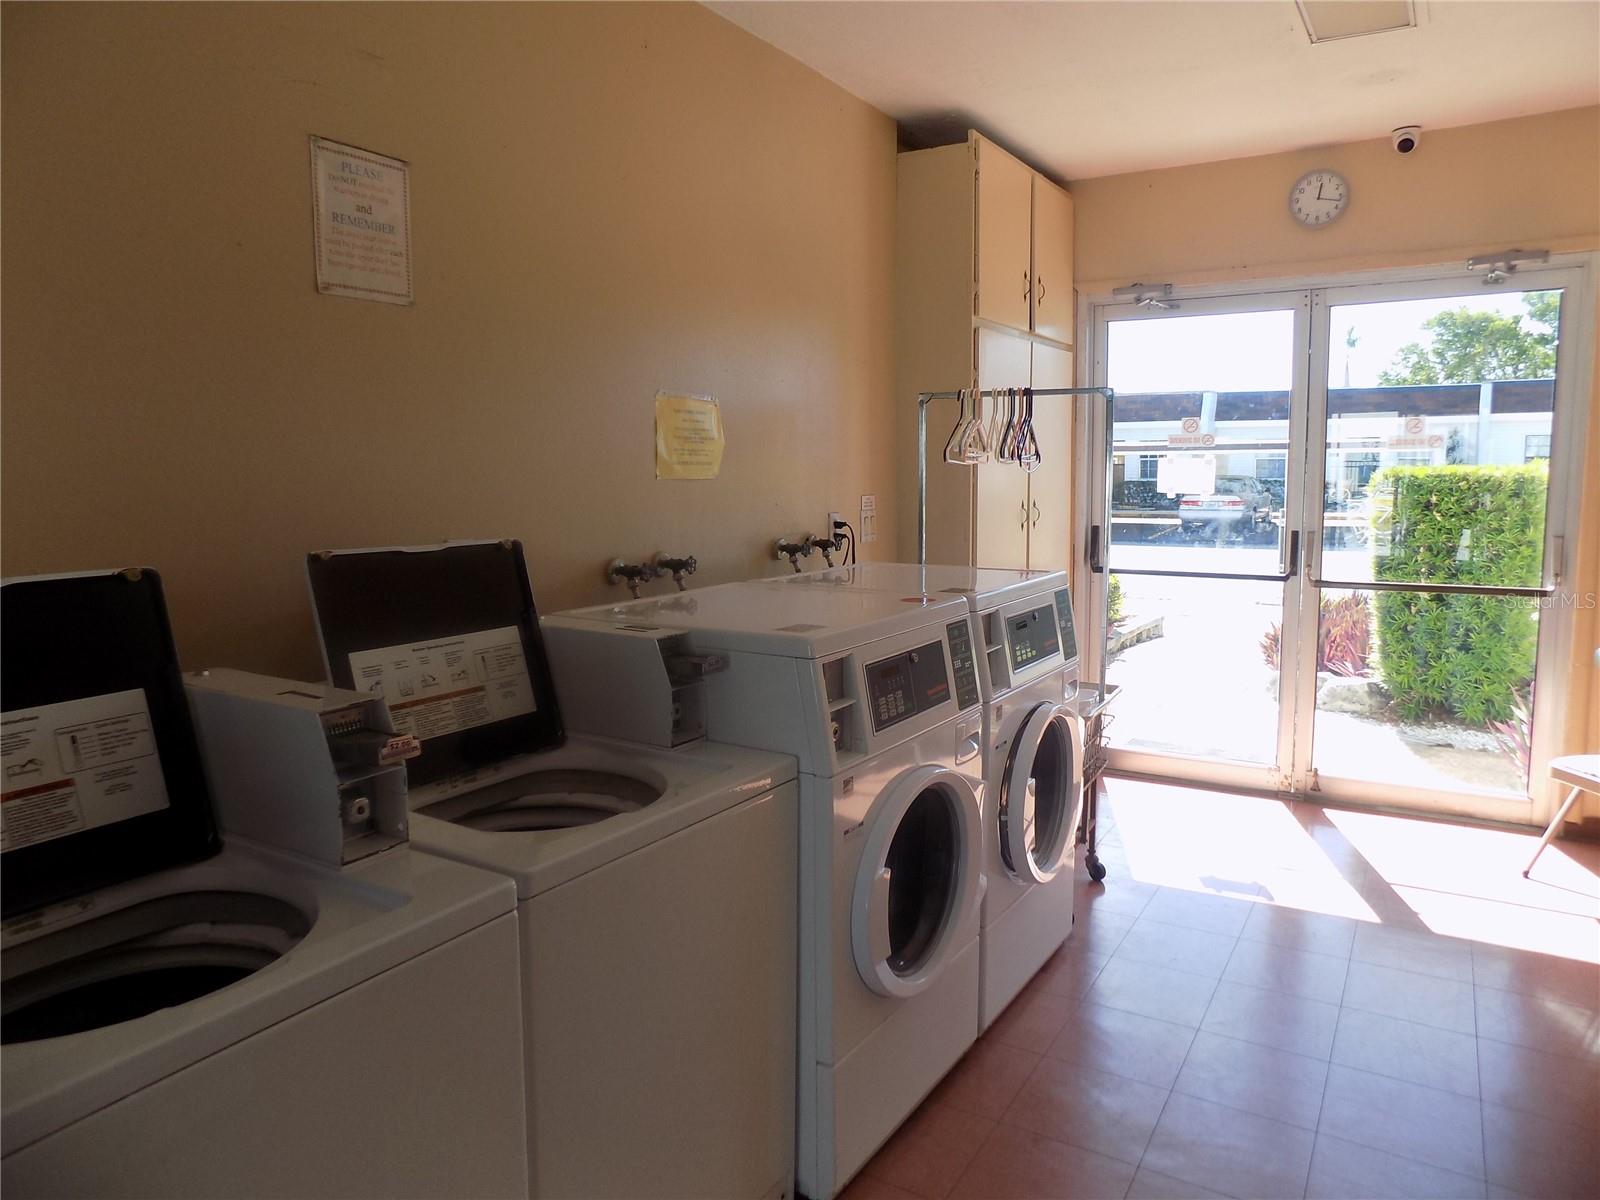 Laundry Room by Clubhouse.